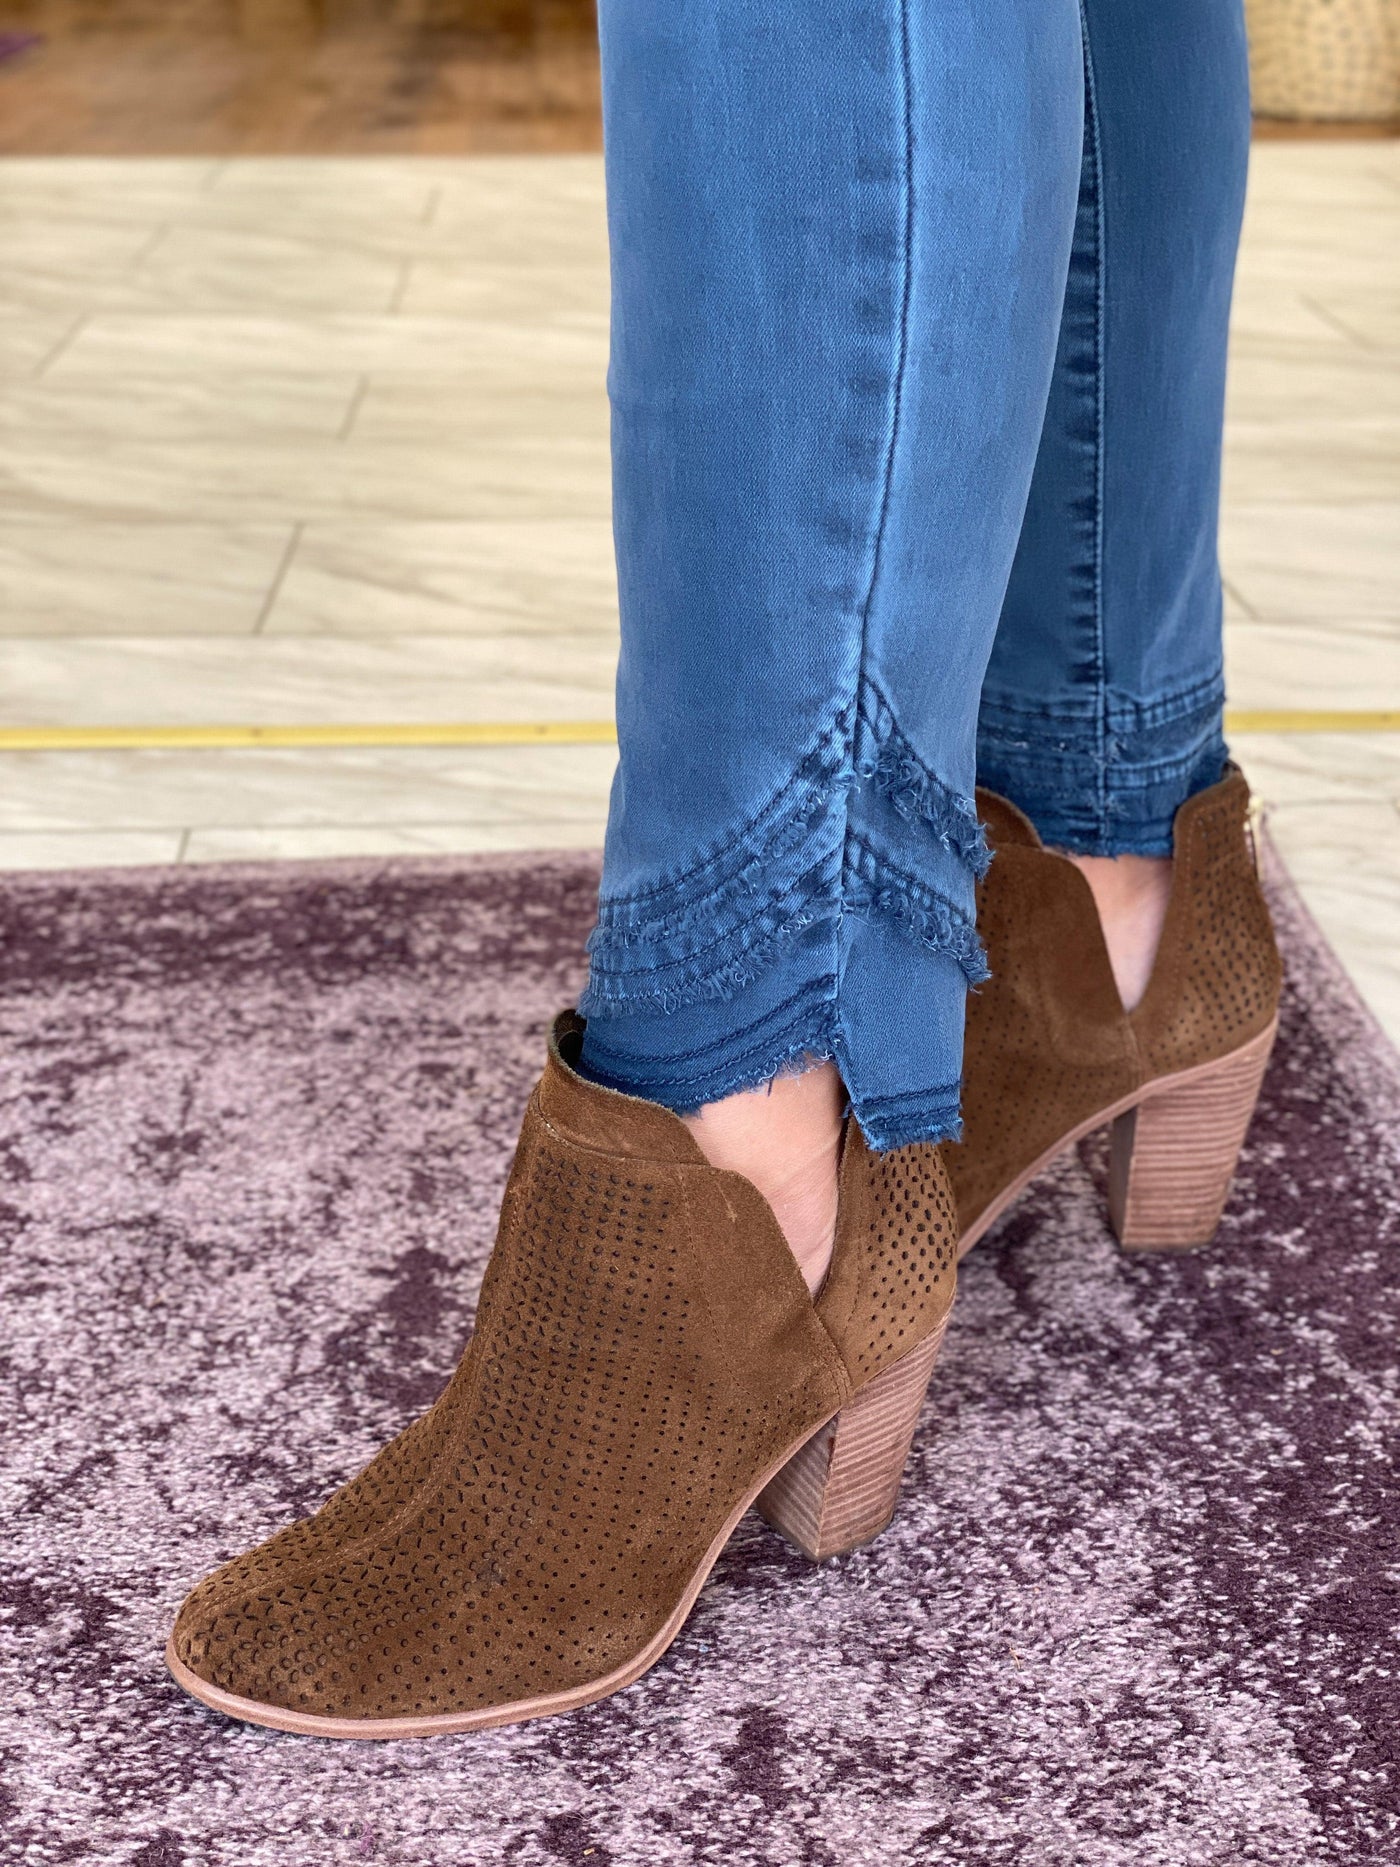 Frayed edge cuff denim pants in balsam paired with brown booties on 5'6" model.